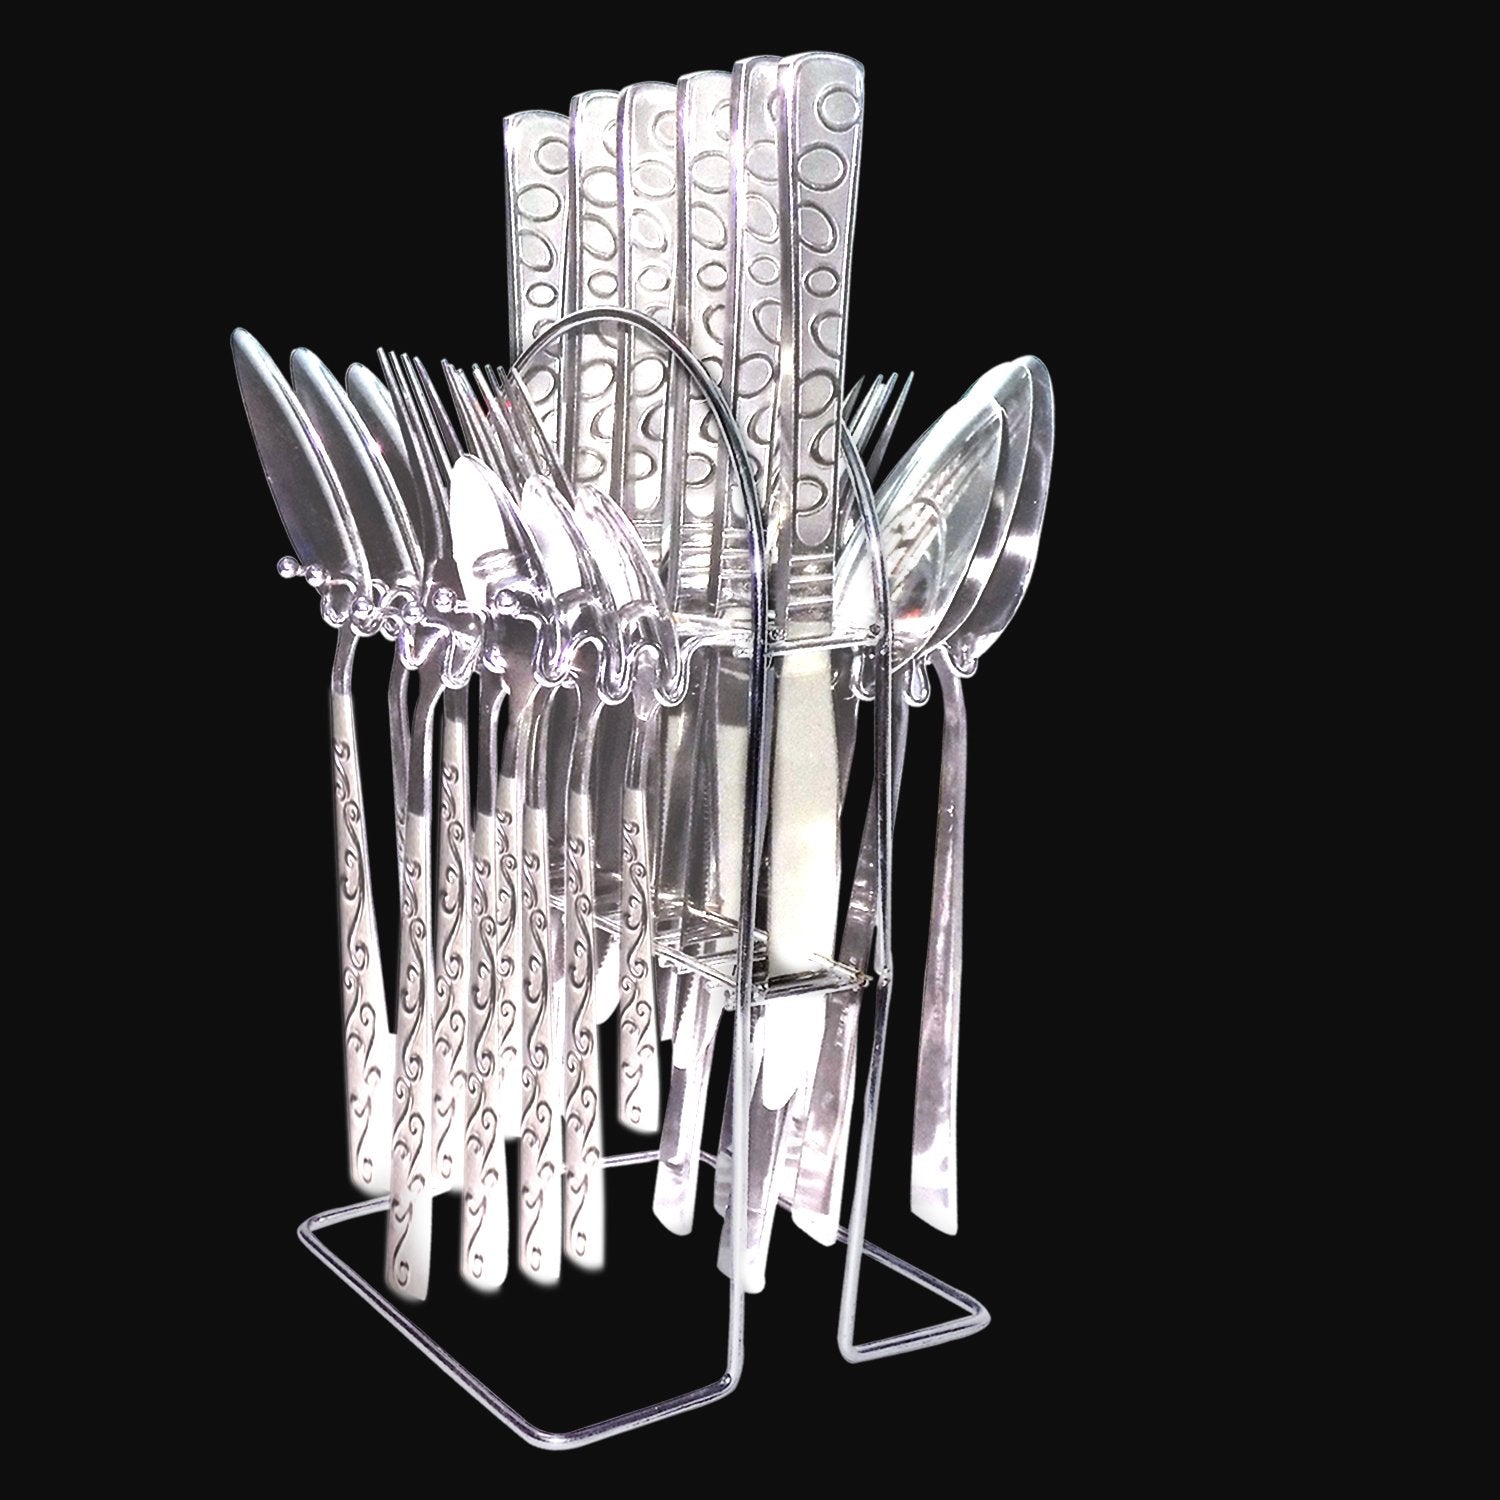 7007 Stainless Steel Stylish Cutlery Set with Spoons, Forks, Butter Knives for Stylish Dining (Set of 24 Pcs) - SkyShopy